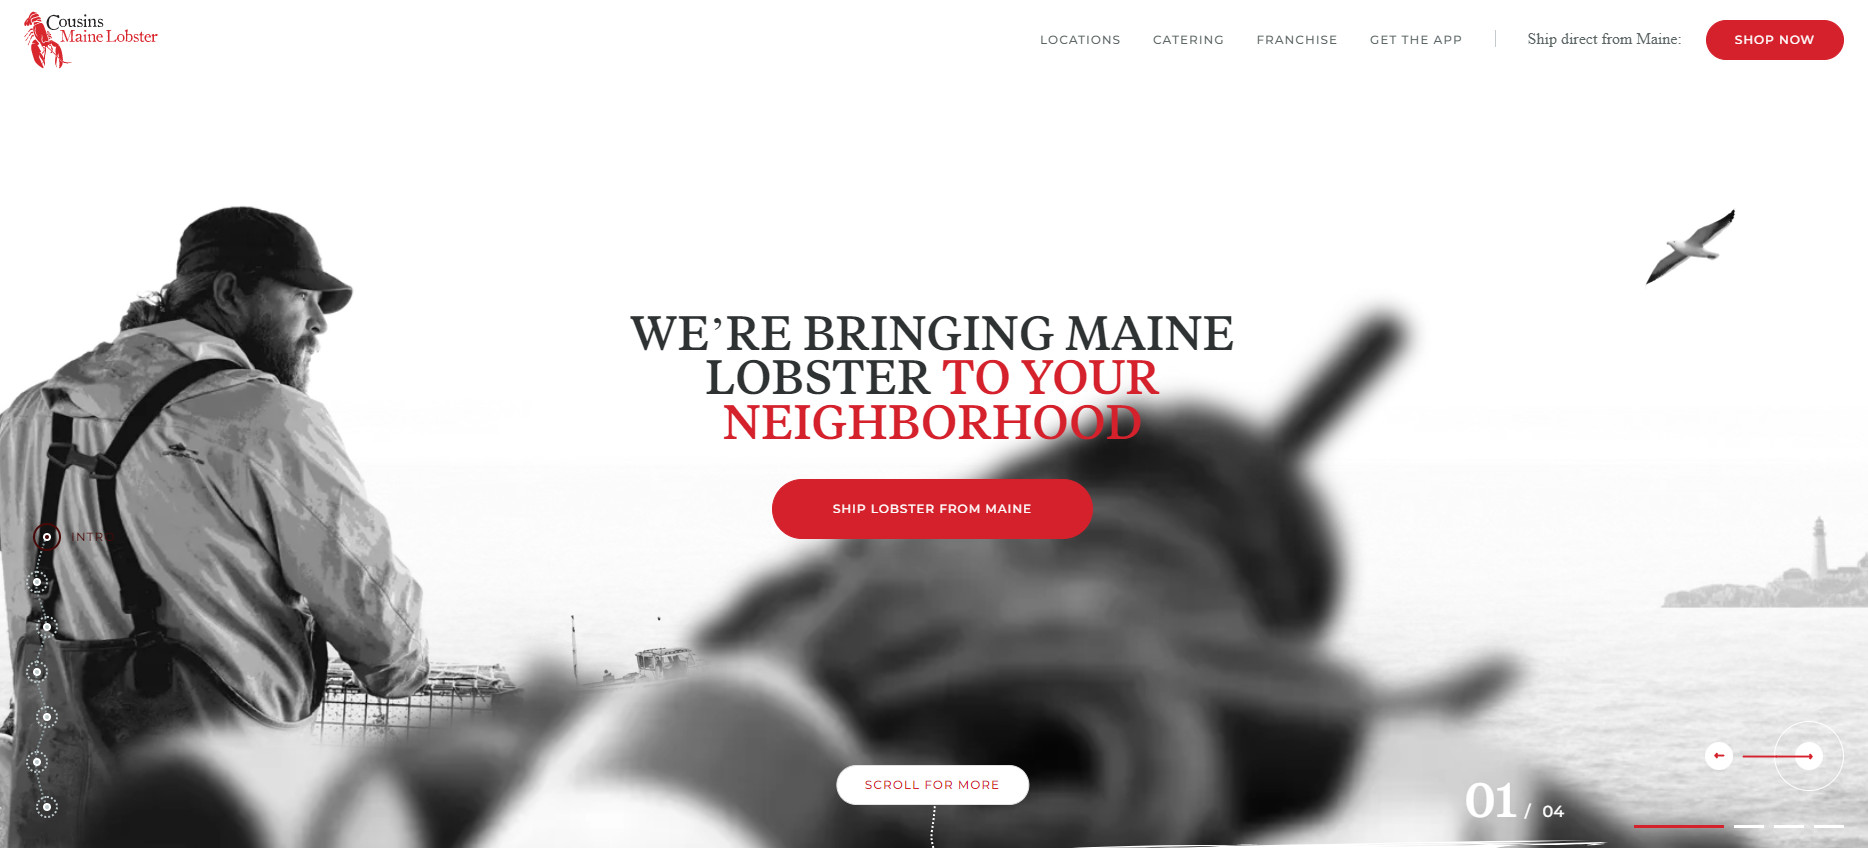 6 food truck websites example Cousins Maine Lobster